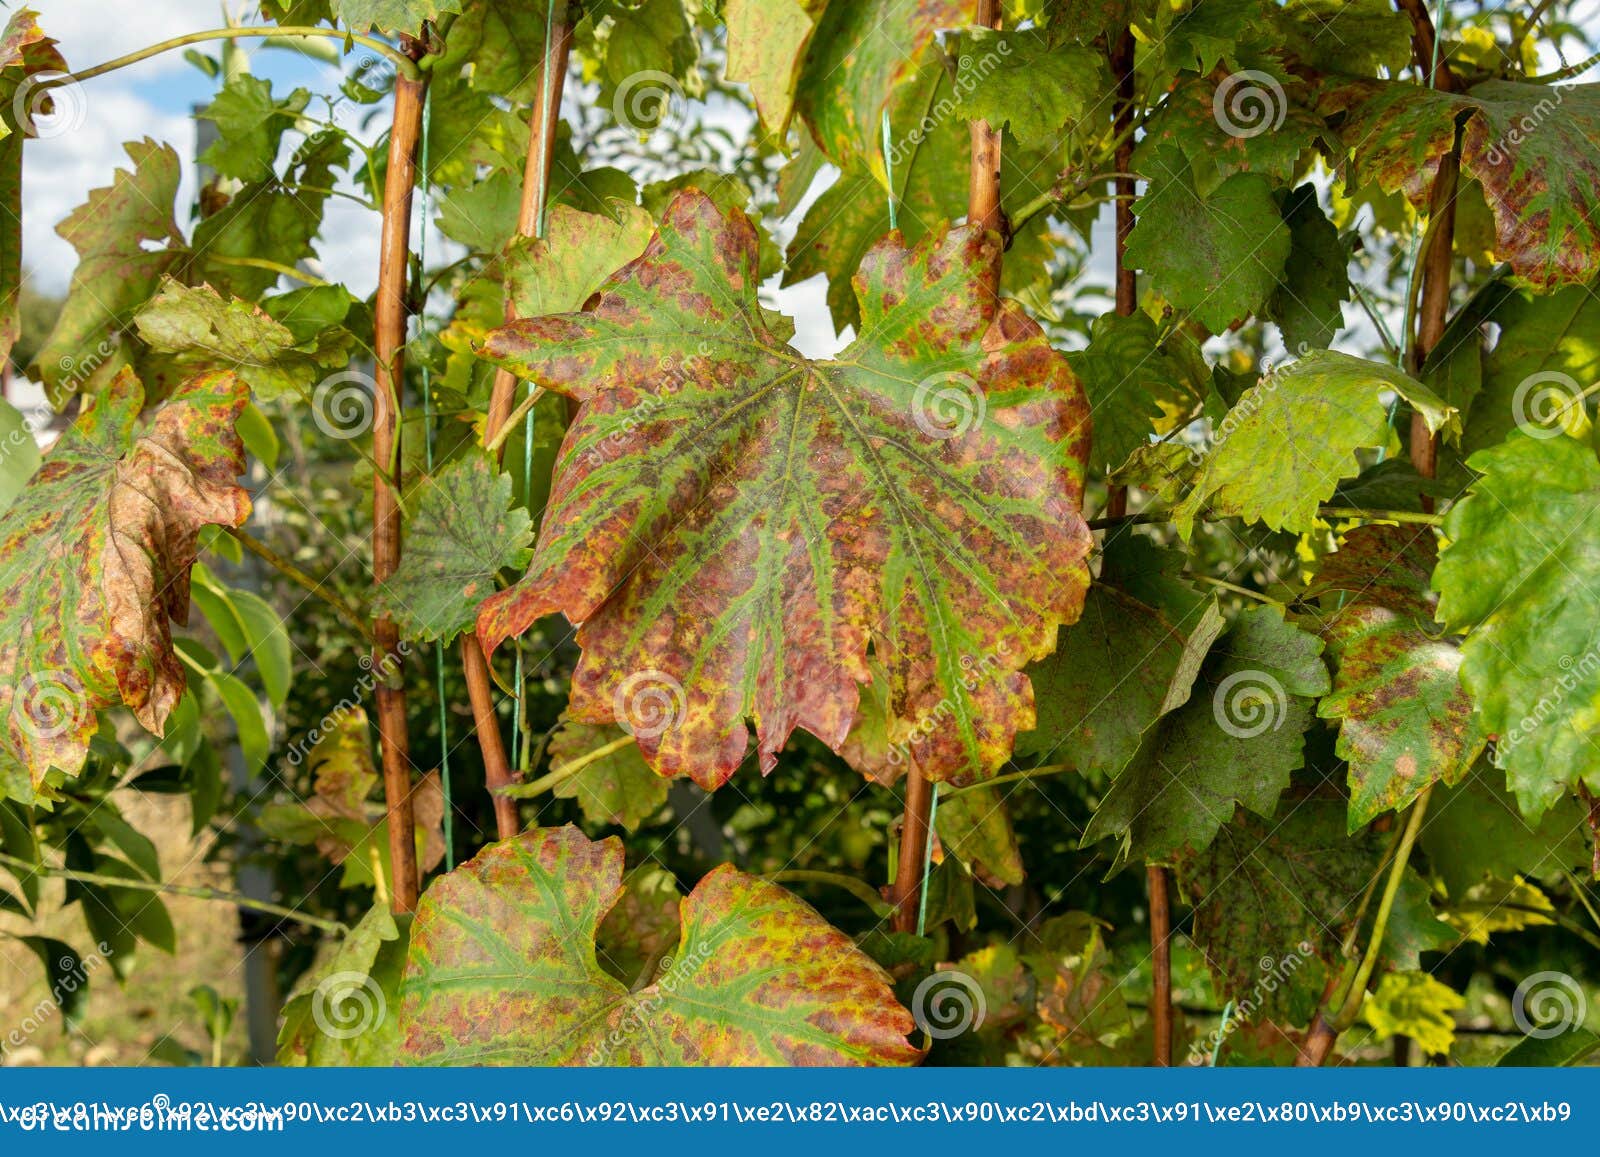 diseased affected leaf of grapes close-up macro. the concept of protecting plantings of grapes from fungal diseases